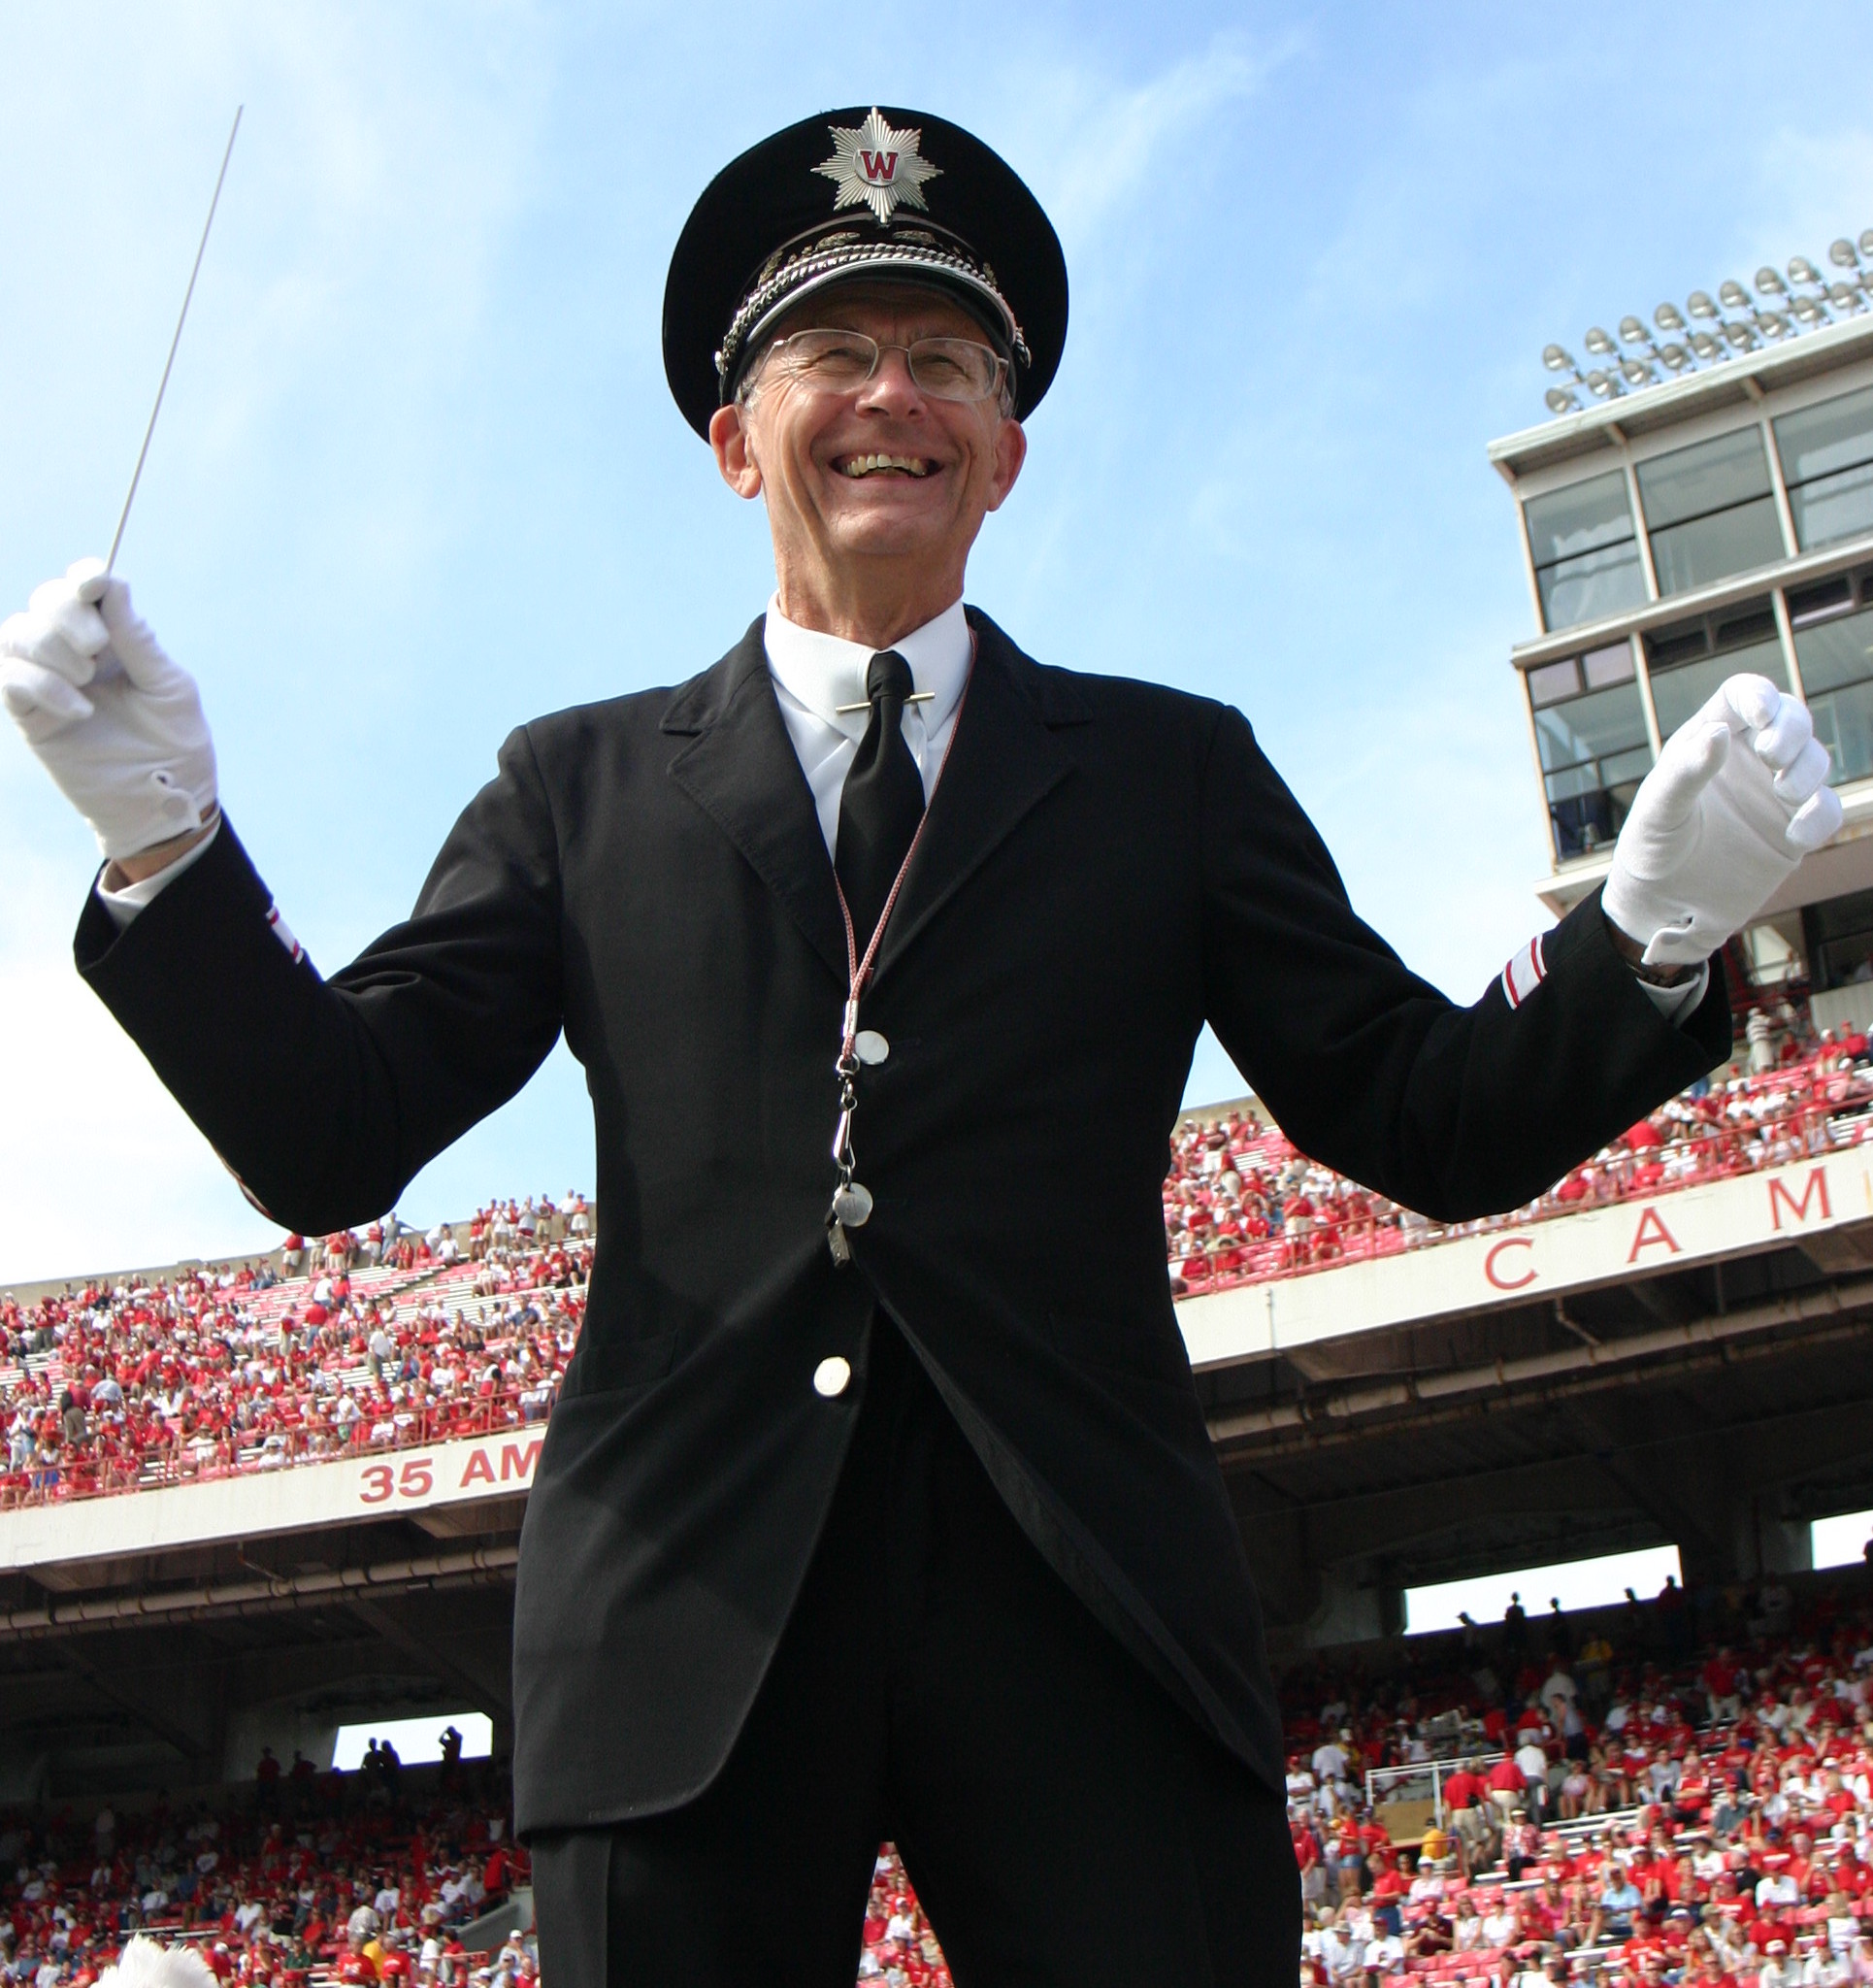 UW Marching Band Director Mike Leckrone